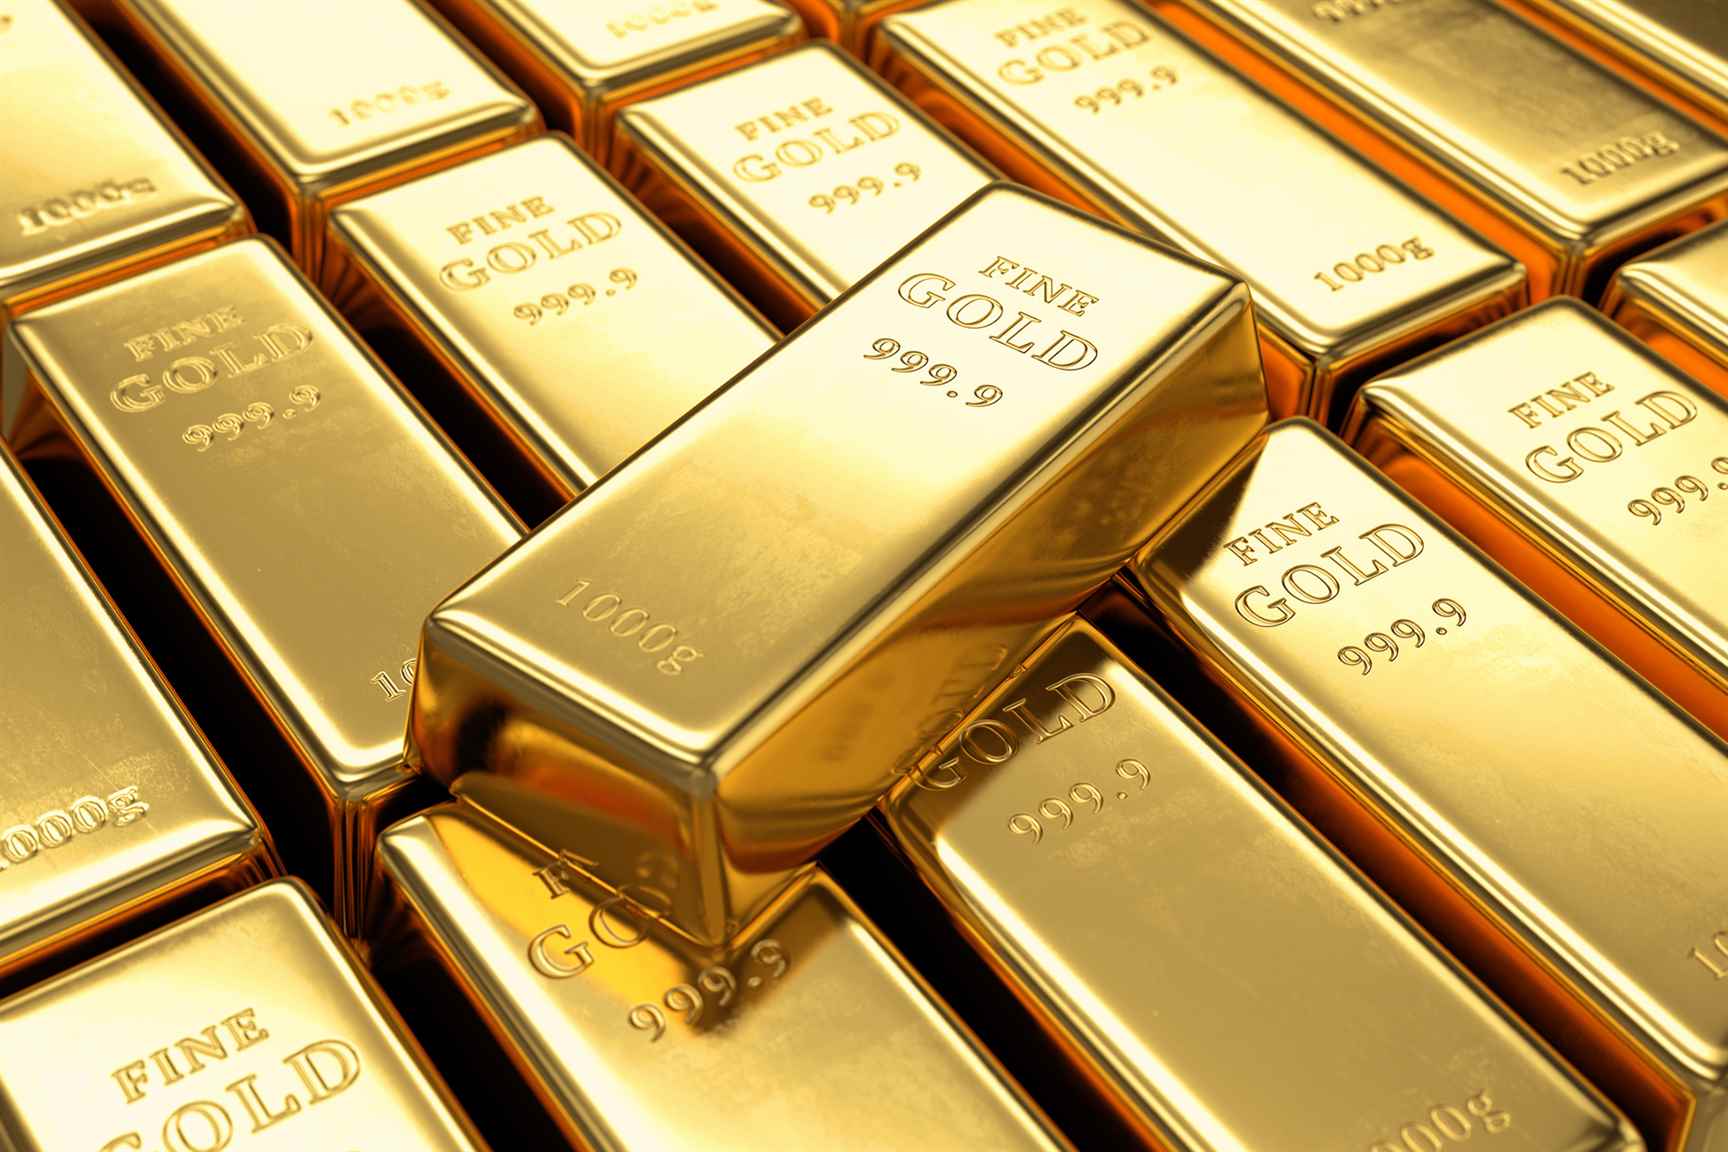 What are the keystones of gold prices?